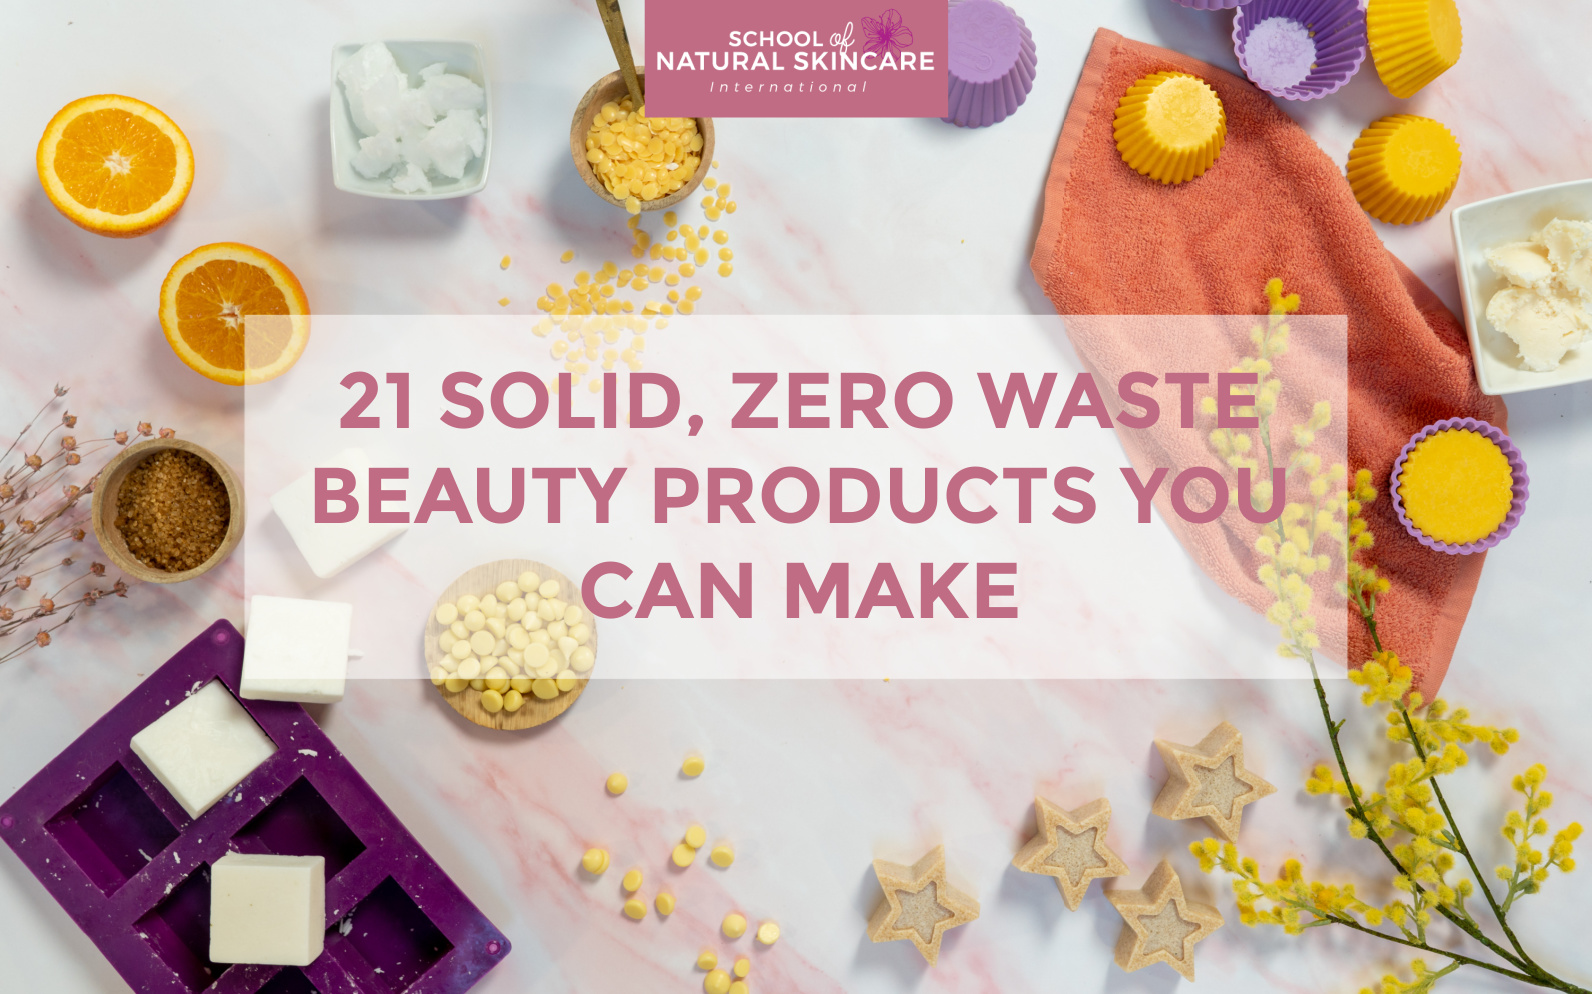 21 solid, zero waste beauty products you can make